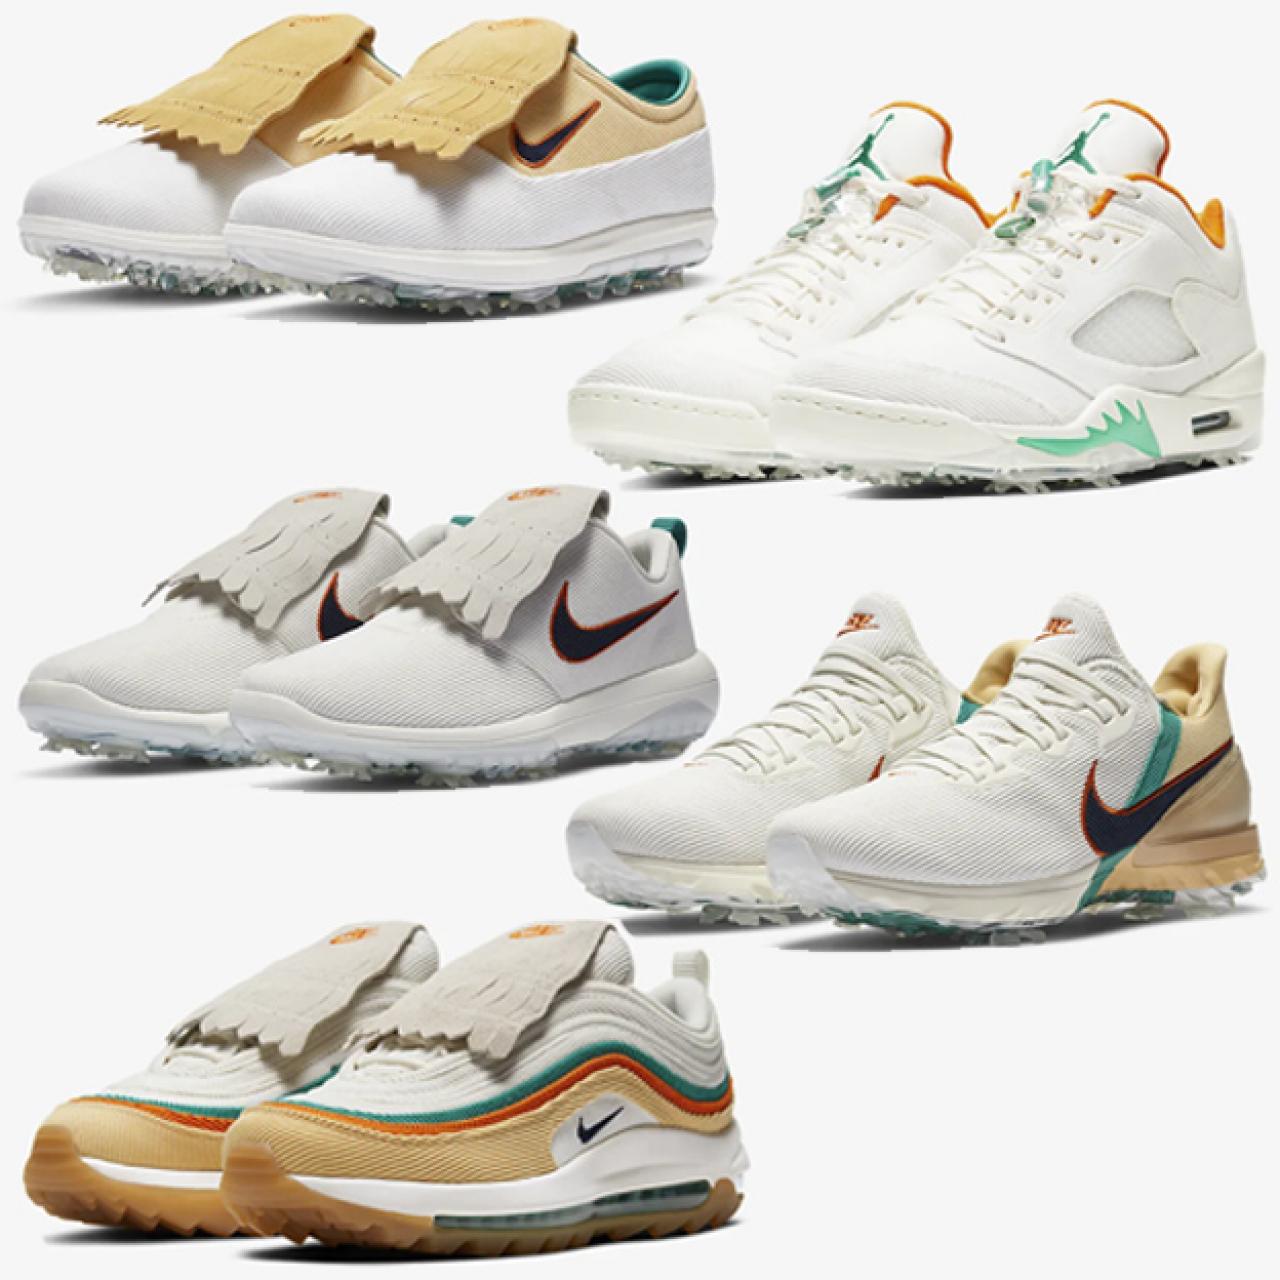 nike golf shoes masters edition